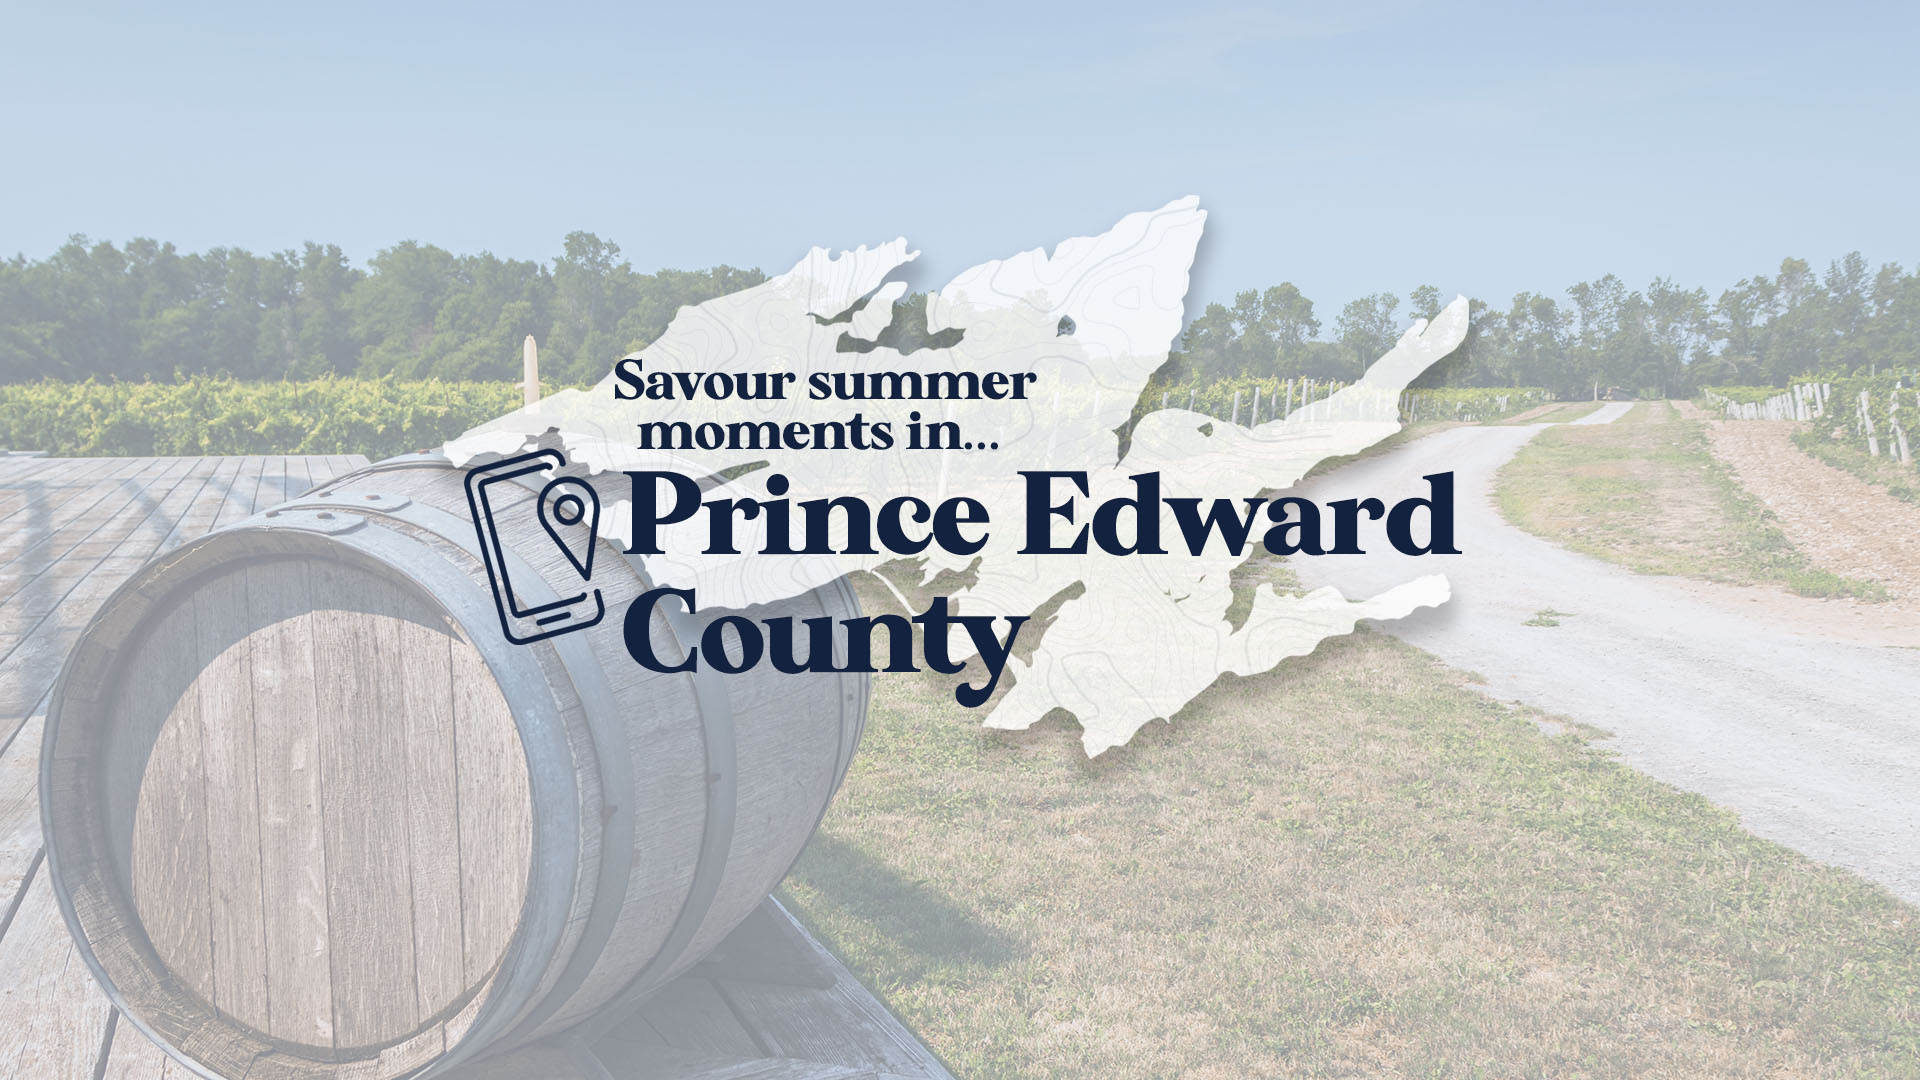 Savour Summer moments in PEC logo over top of an image of a vineyard and wine barrels. 